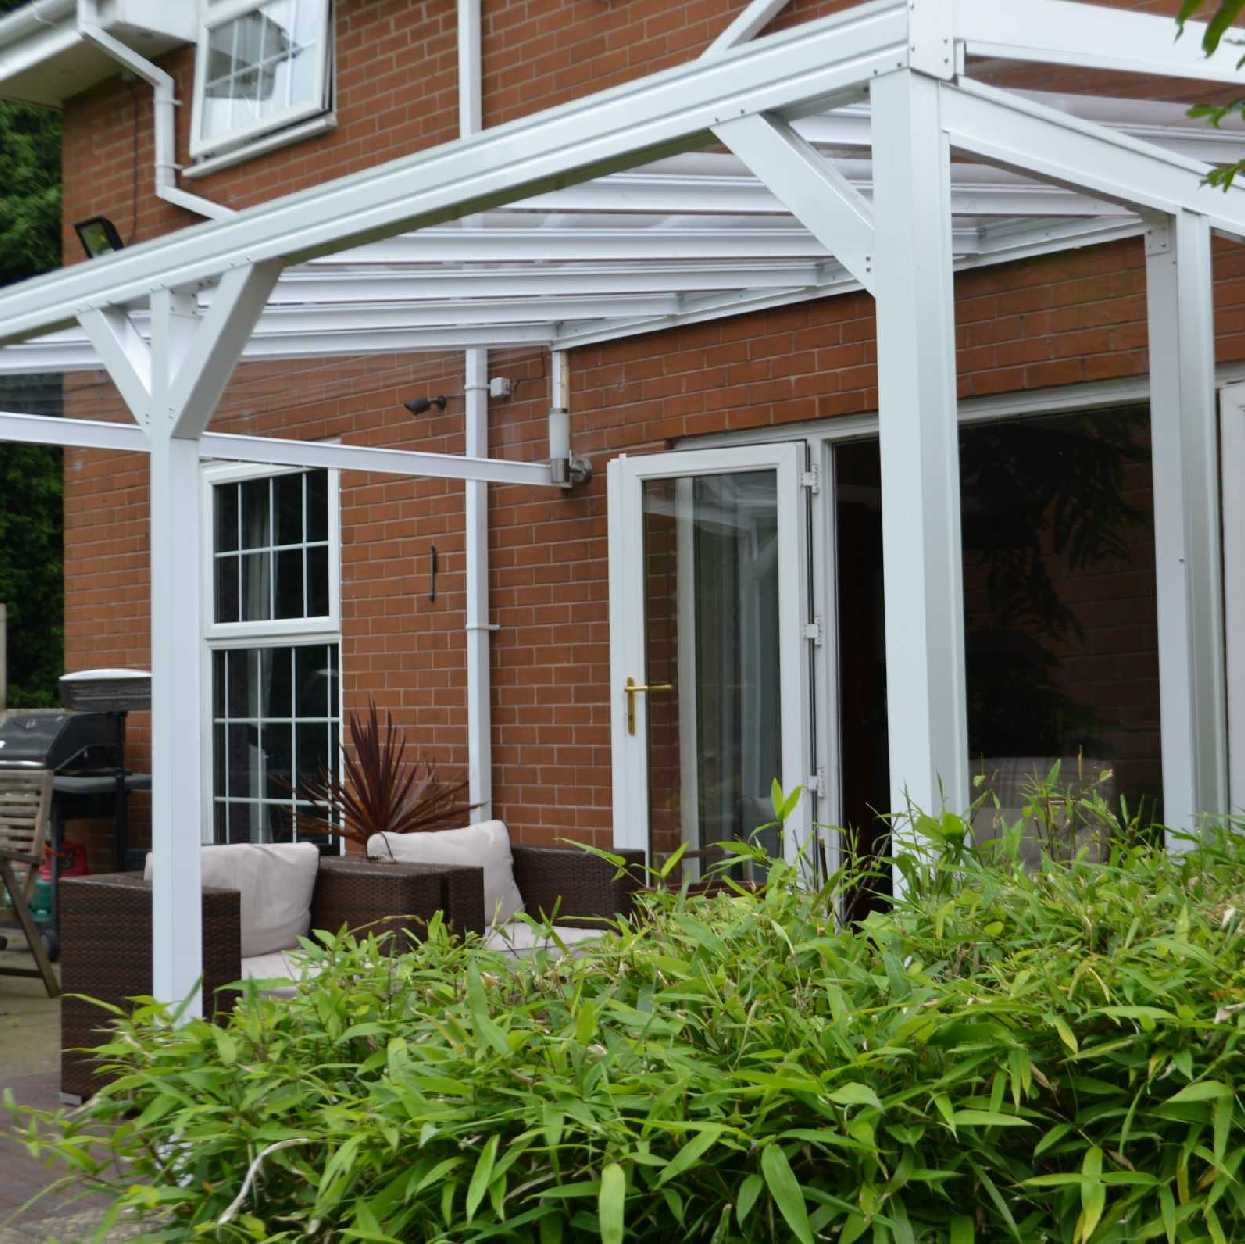 Omega Smart Lean-To Canopy, White with 6mm Glass Clear Plate Polycarbonate Glazing - 4.2m (W) x 2.5m (P), (3) Supporting Posts from Omega Build